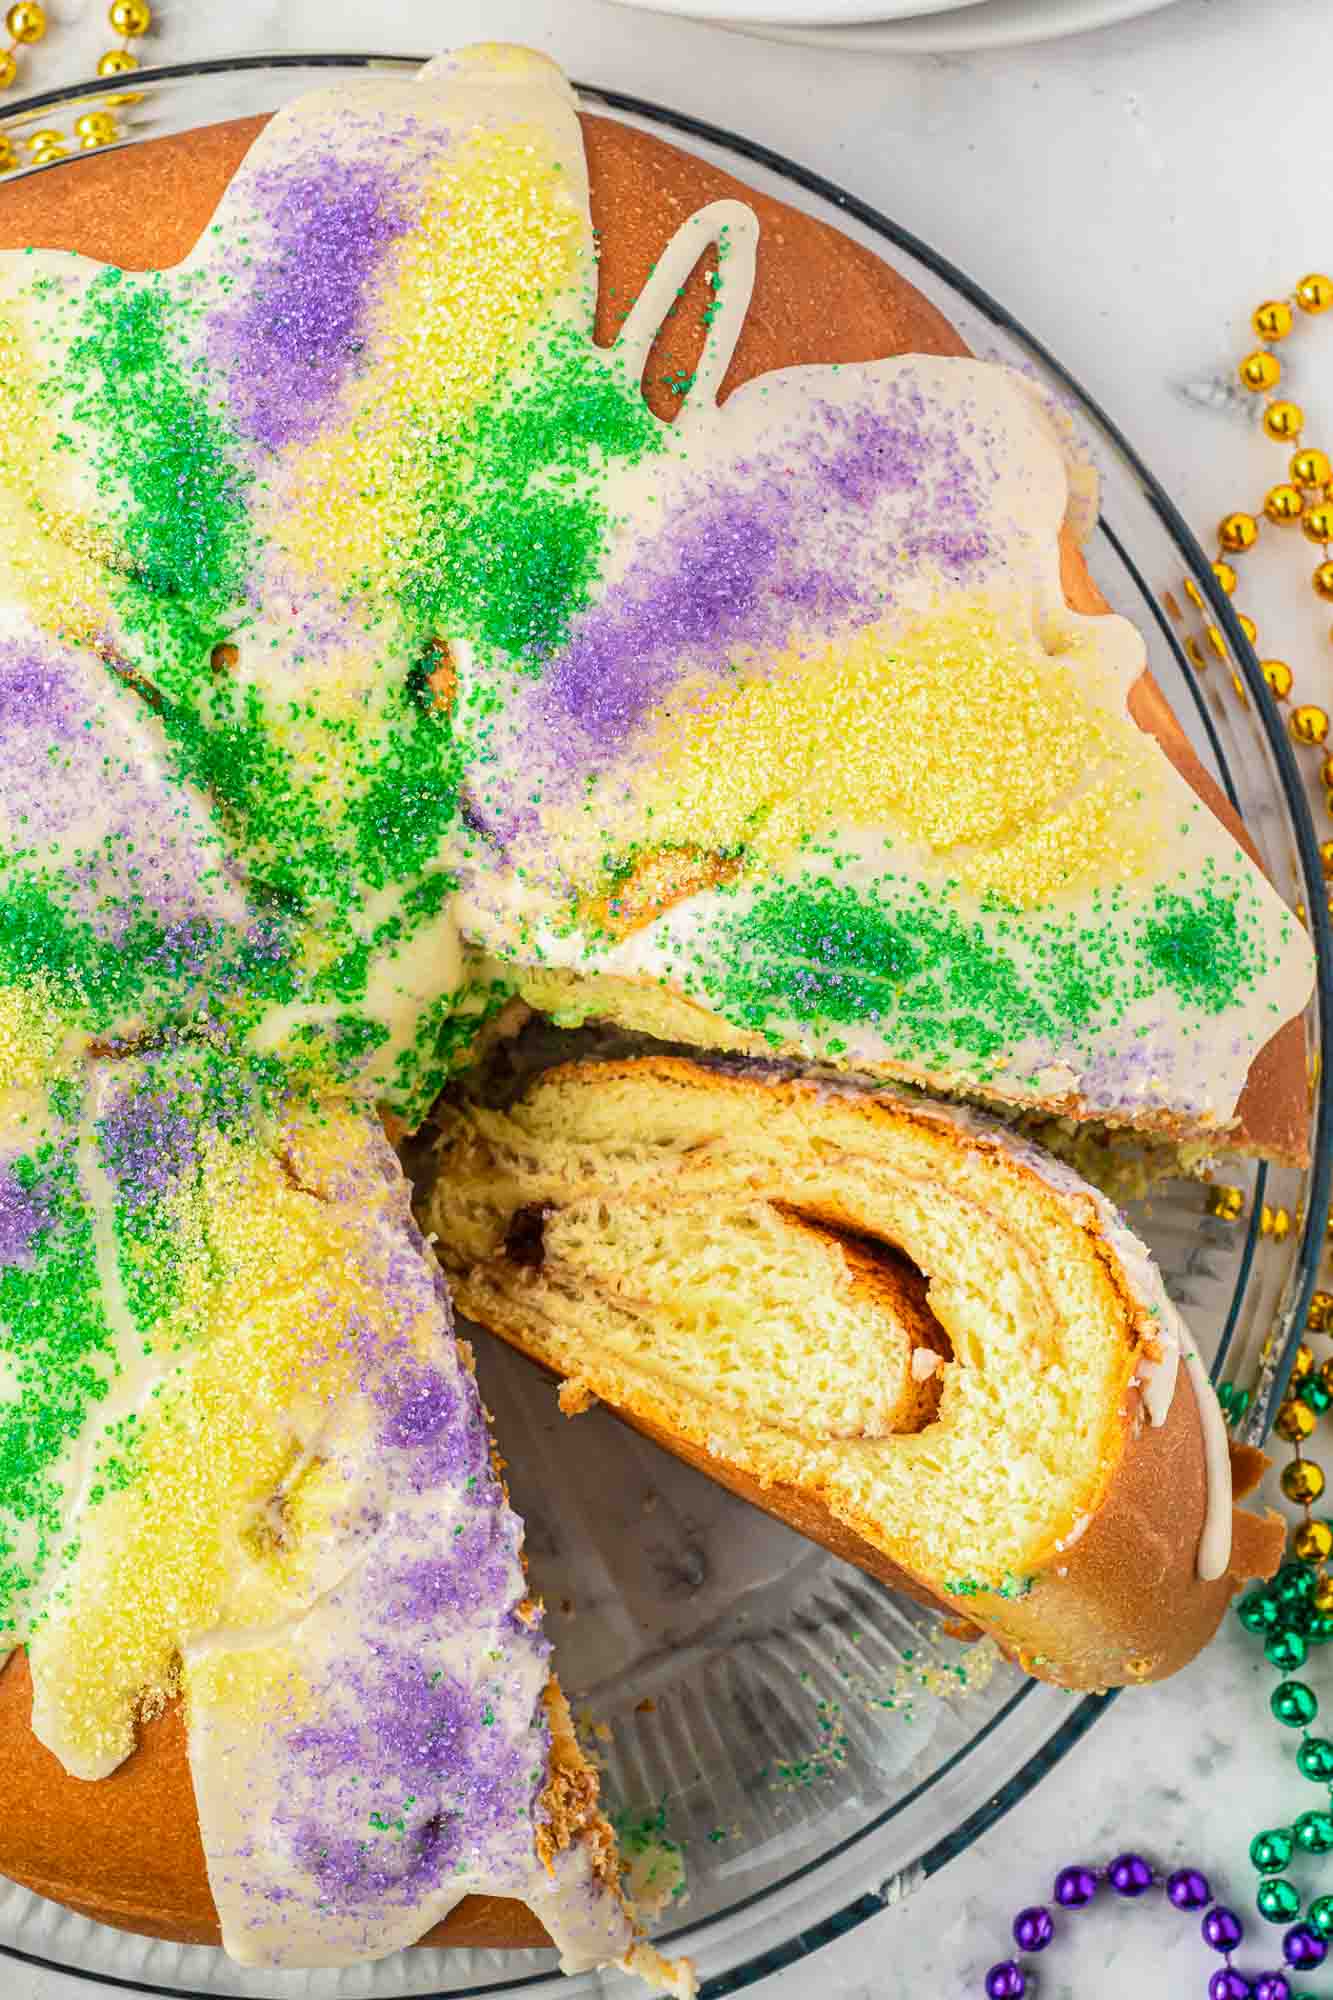 Overhead shot of an iced King cake with a slice